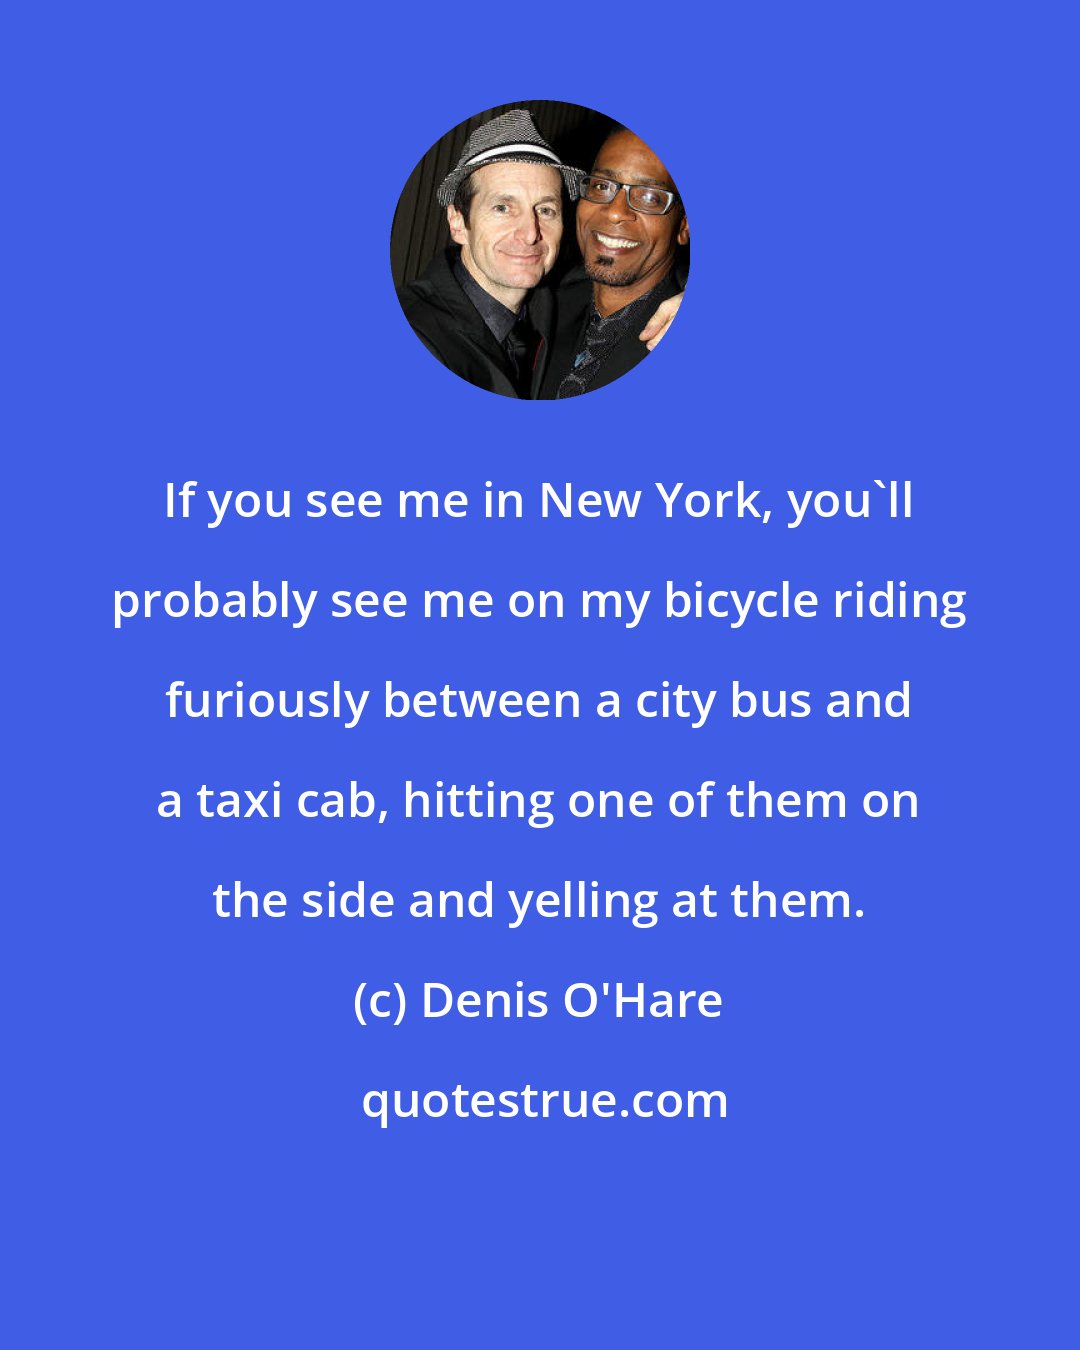 Denis O'Hare: If you see me in New York, you'll probably see me on my bicycle riding furiously between a city bus and a taxi cab, hitting one of them on the side and yelling at them.